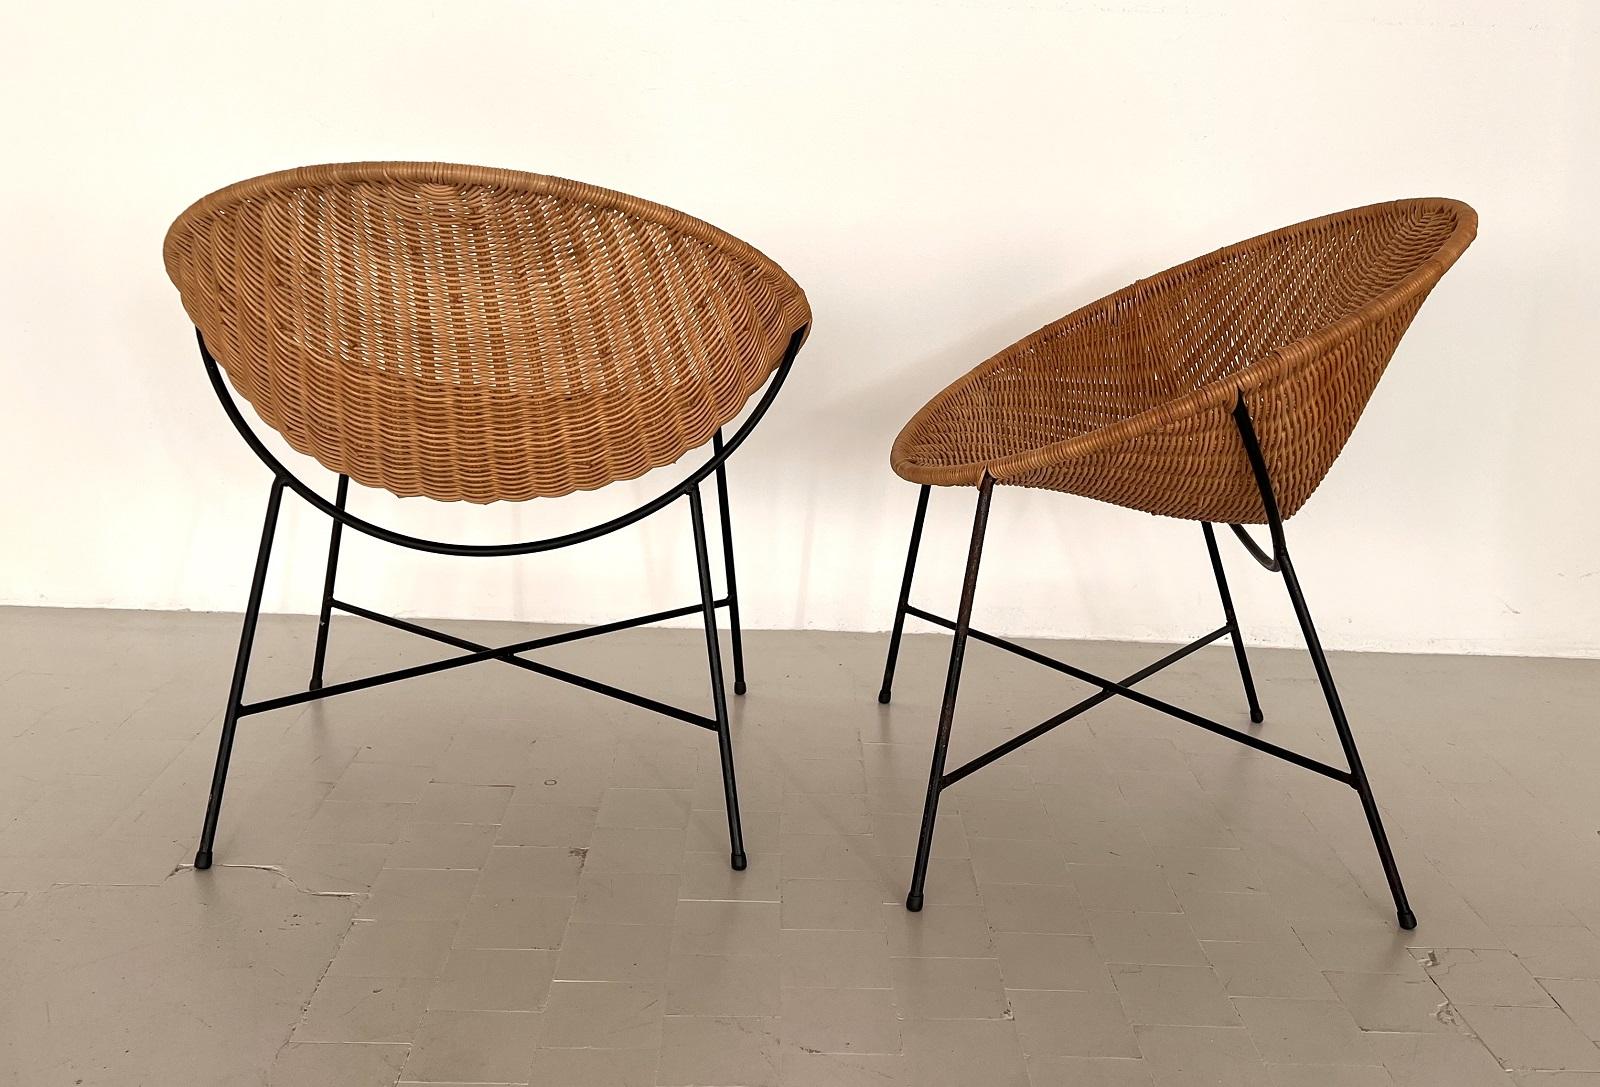 Pair of Mid-Century Rattan Lounge Chairs, 1970s For Sale 3